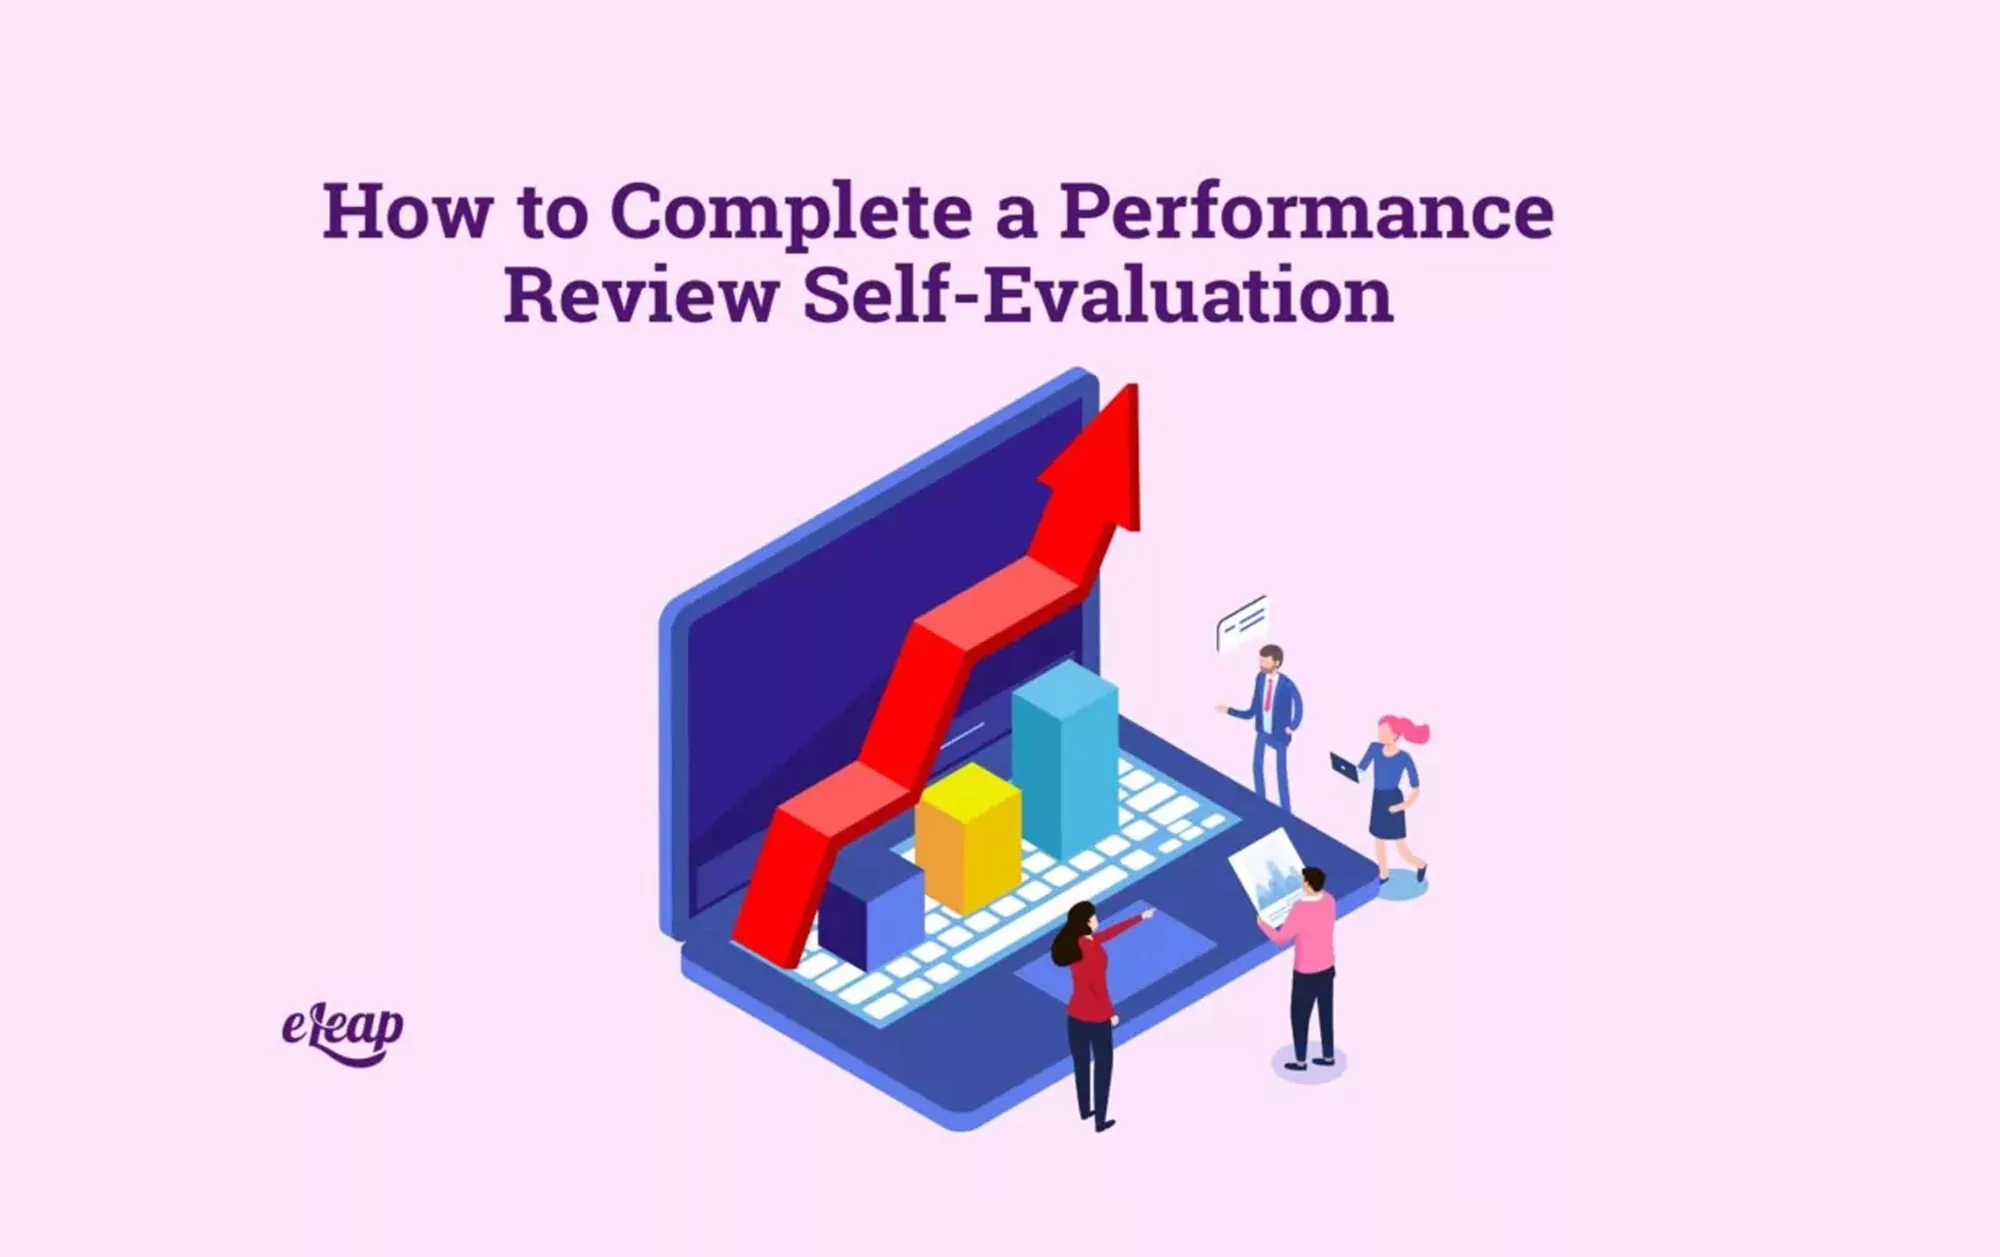 How to Complete a Performance Review Self-Evaluation